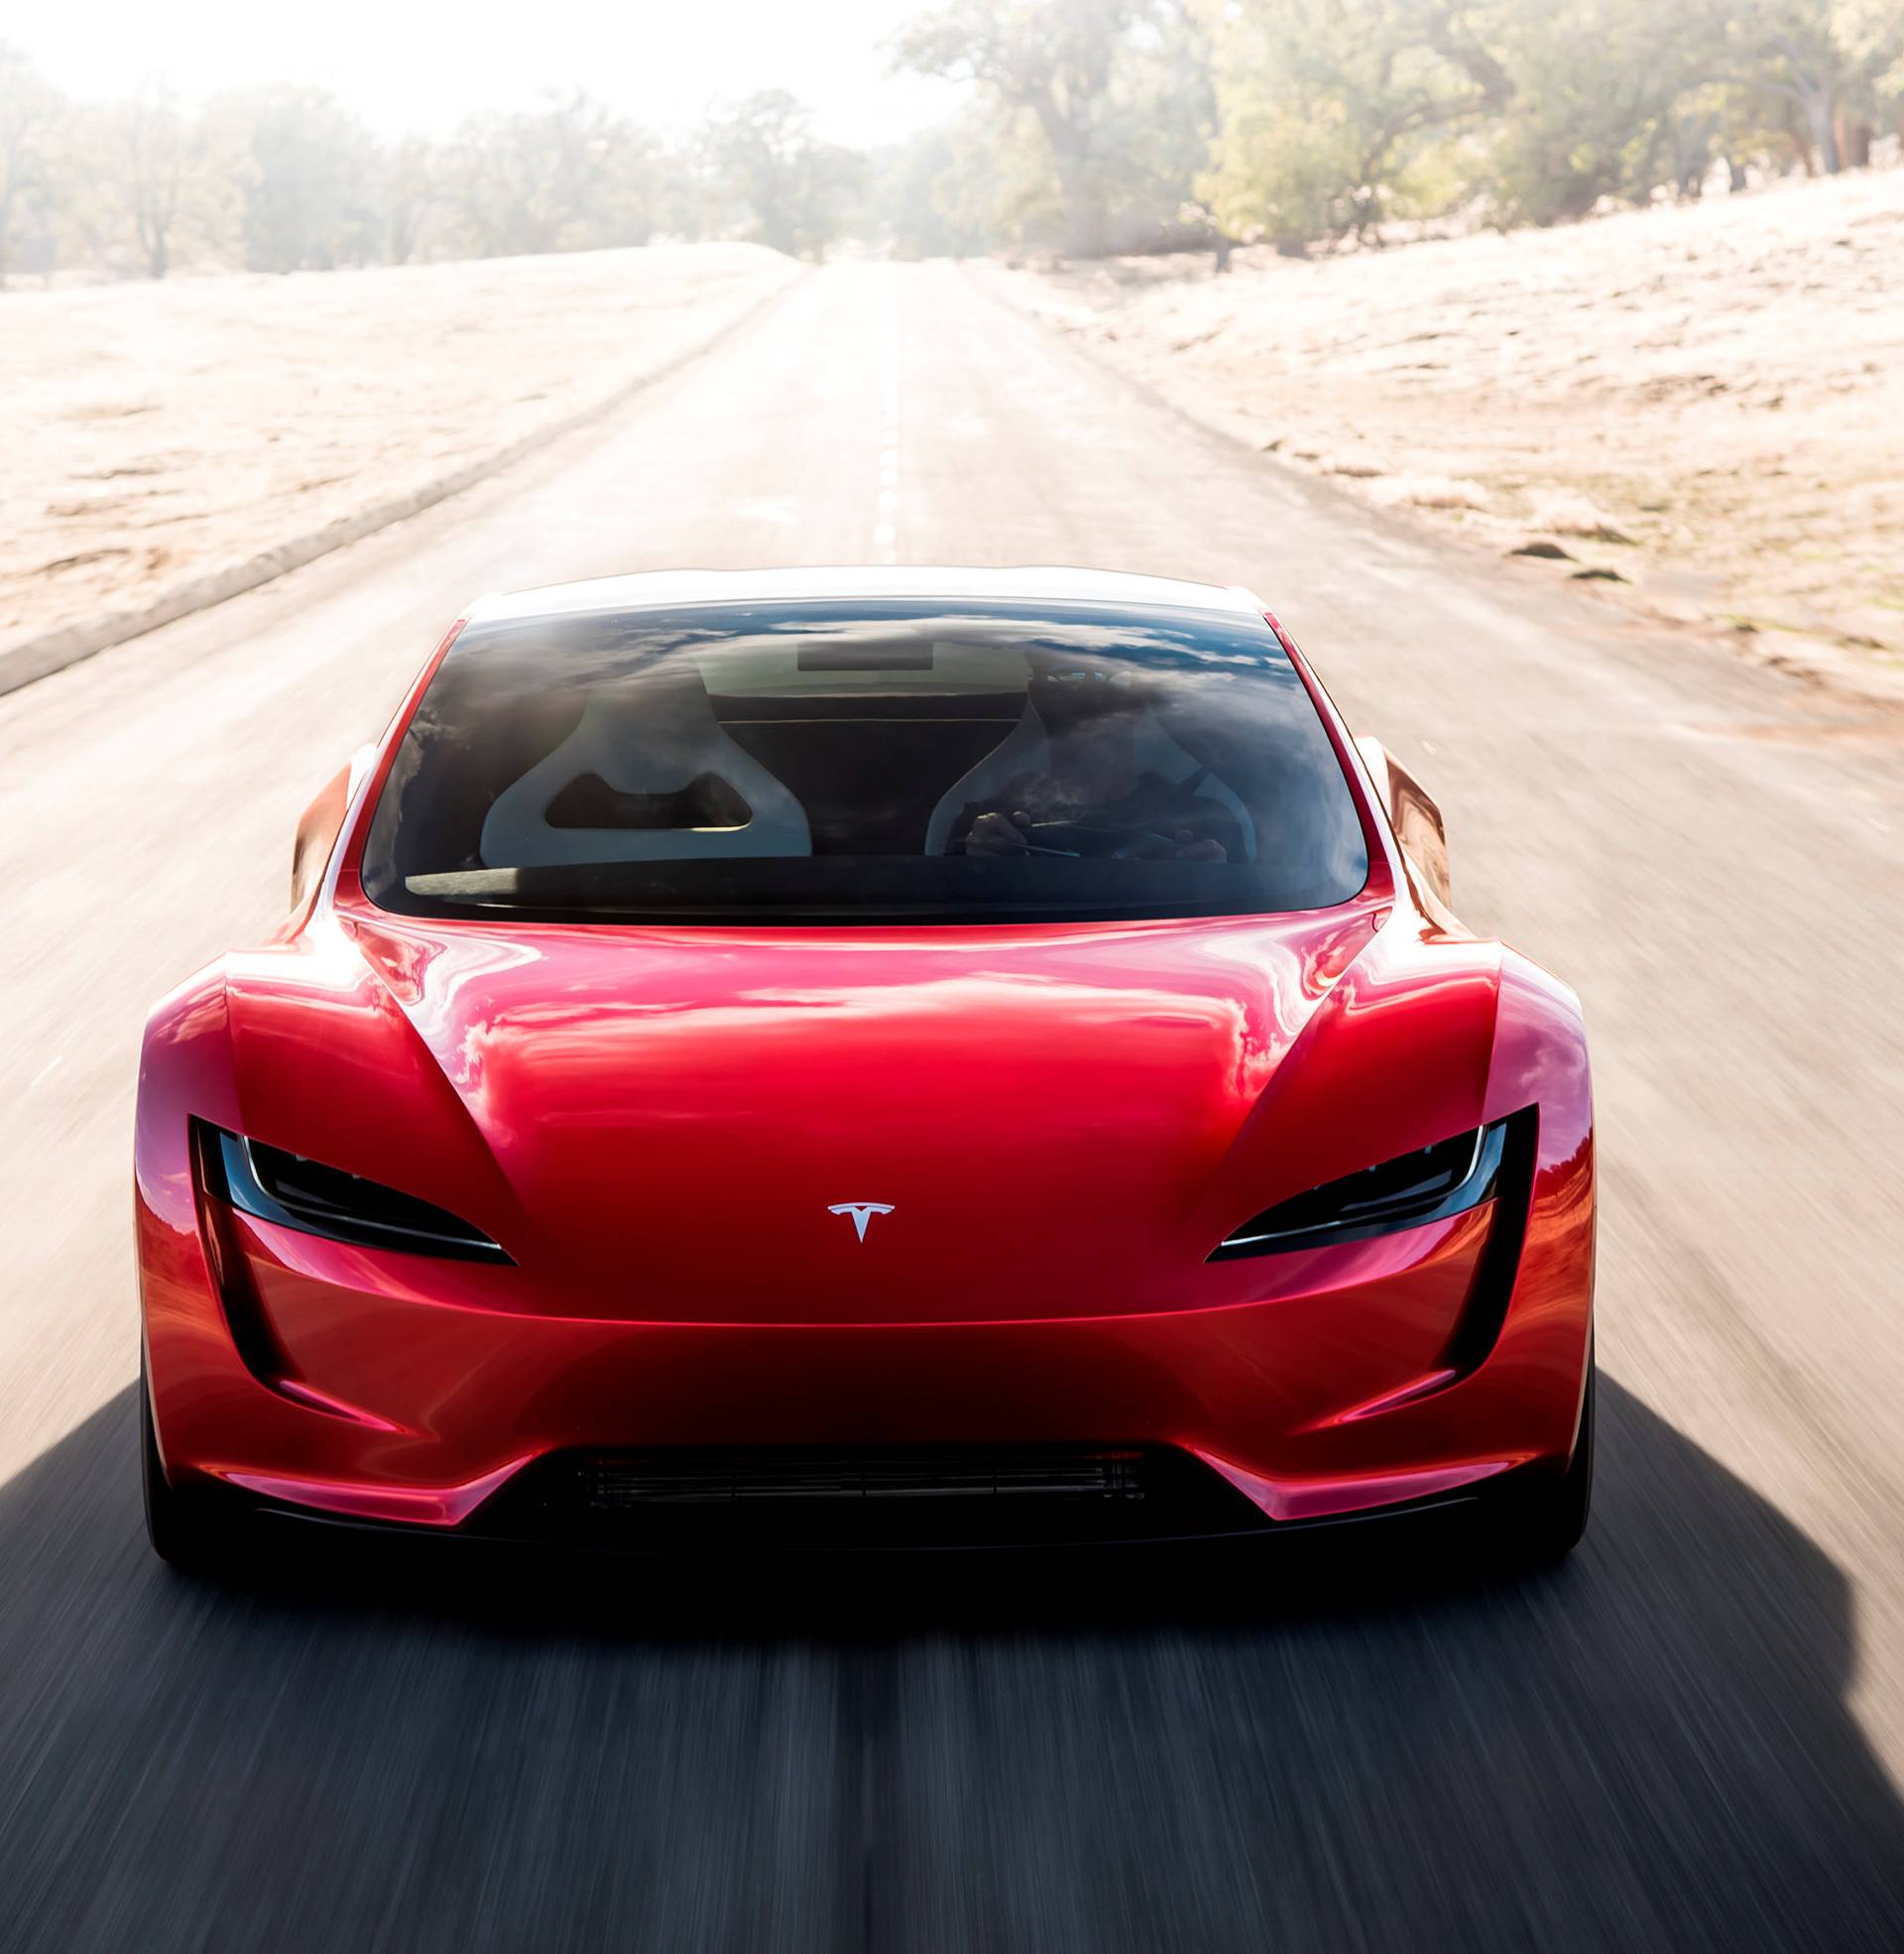 Tesla Roadster 2 is shown in this undated handout photo, during a presentation in Hawthorne, California